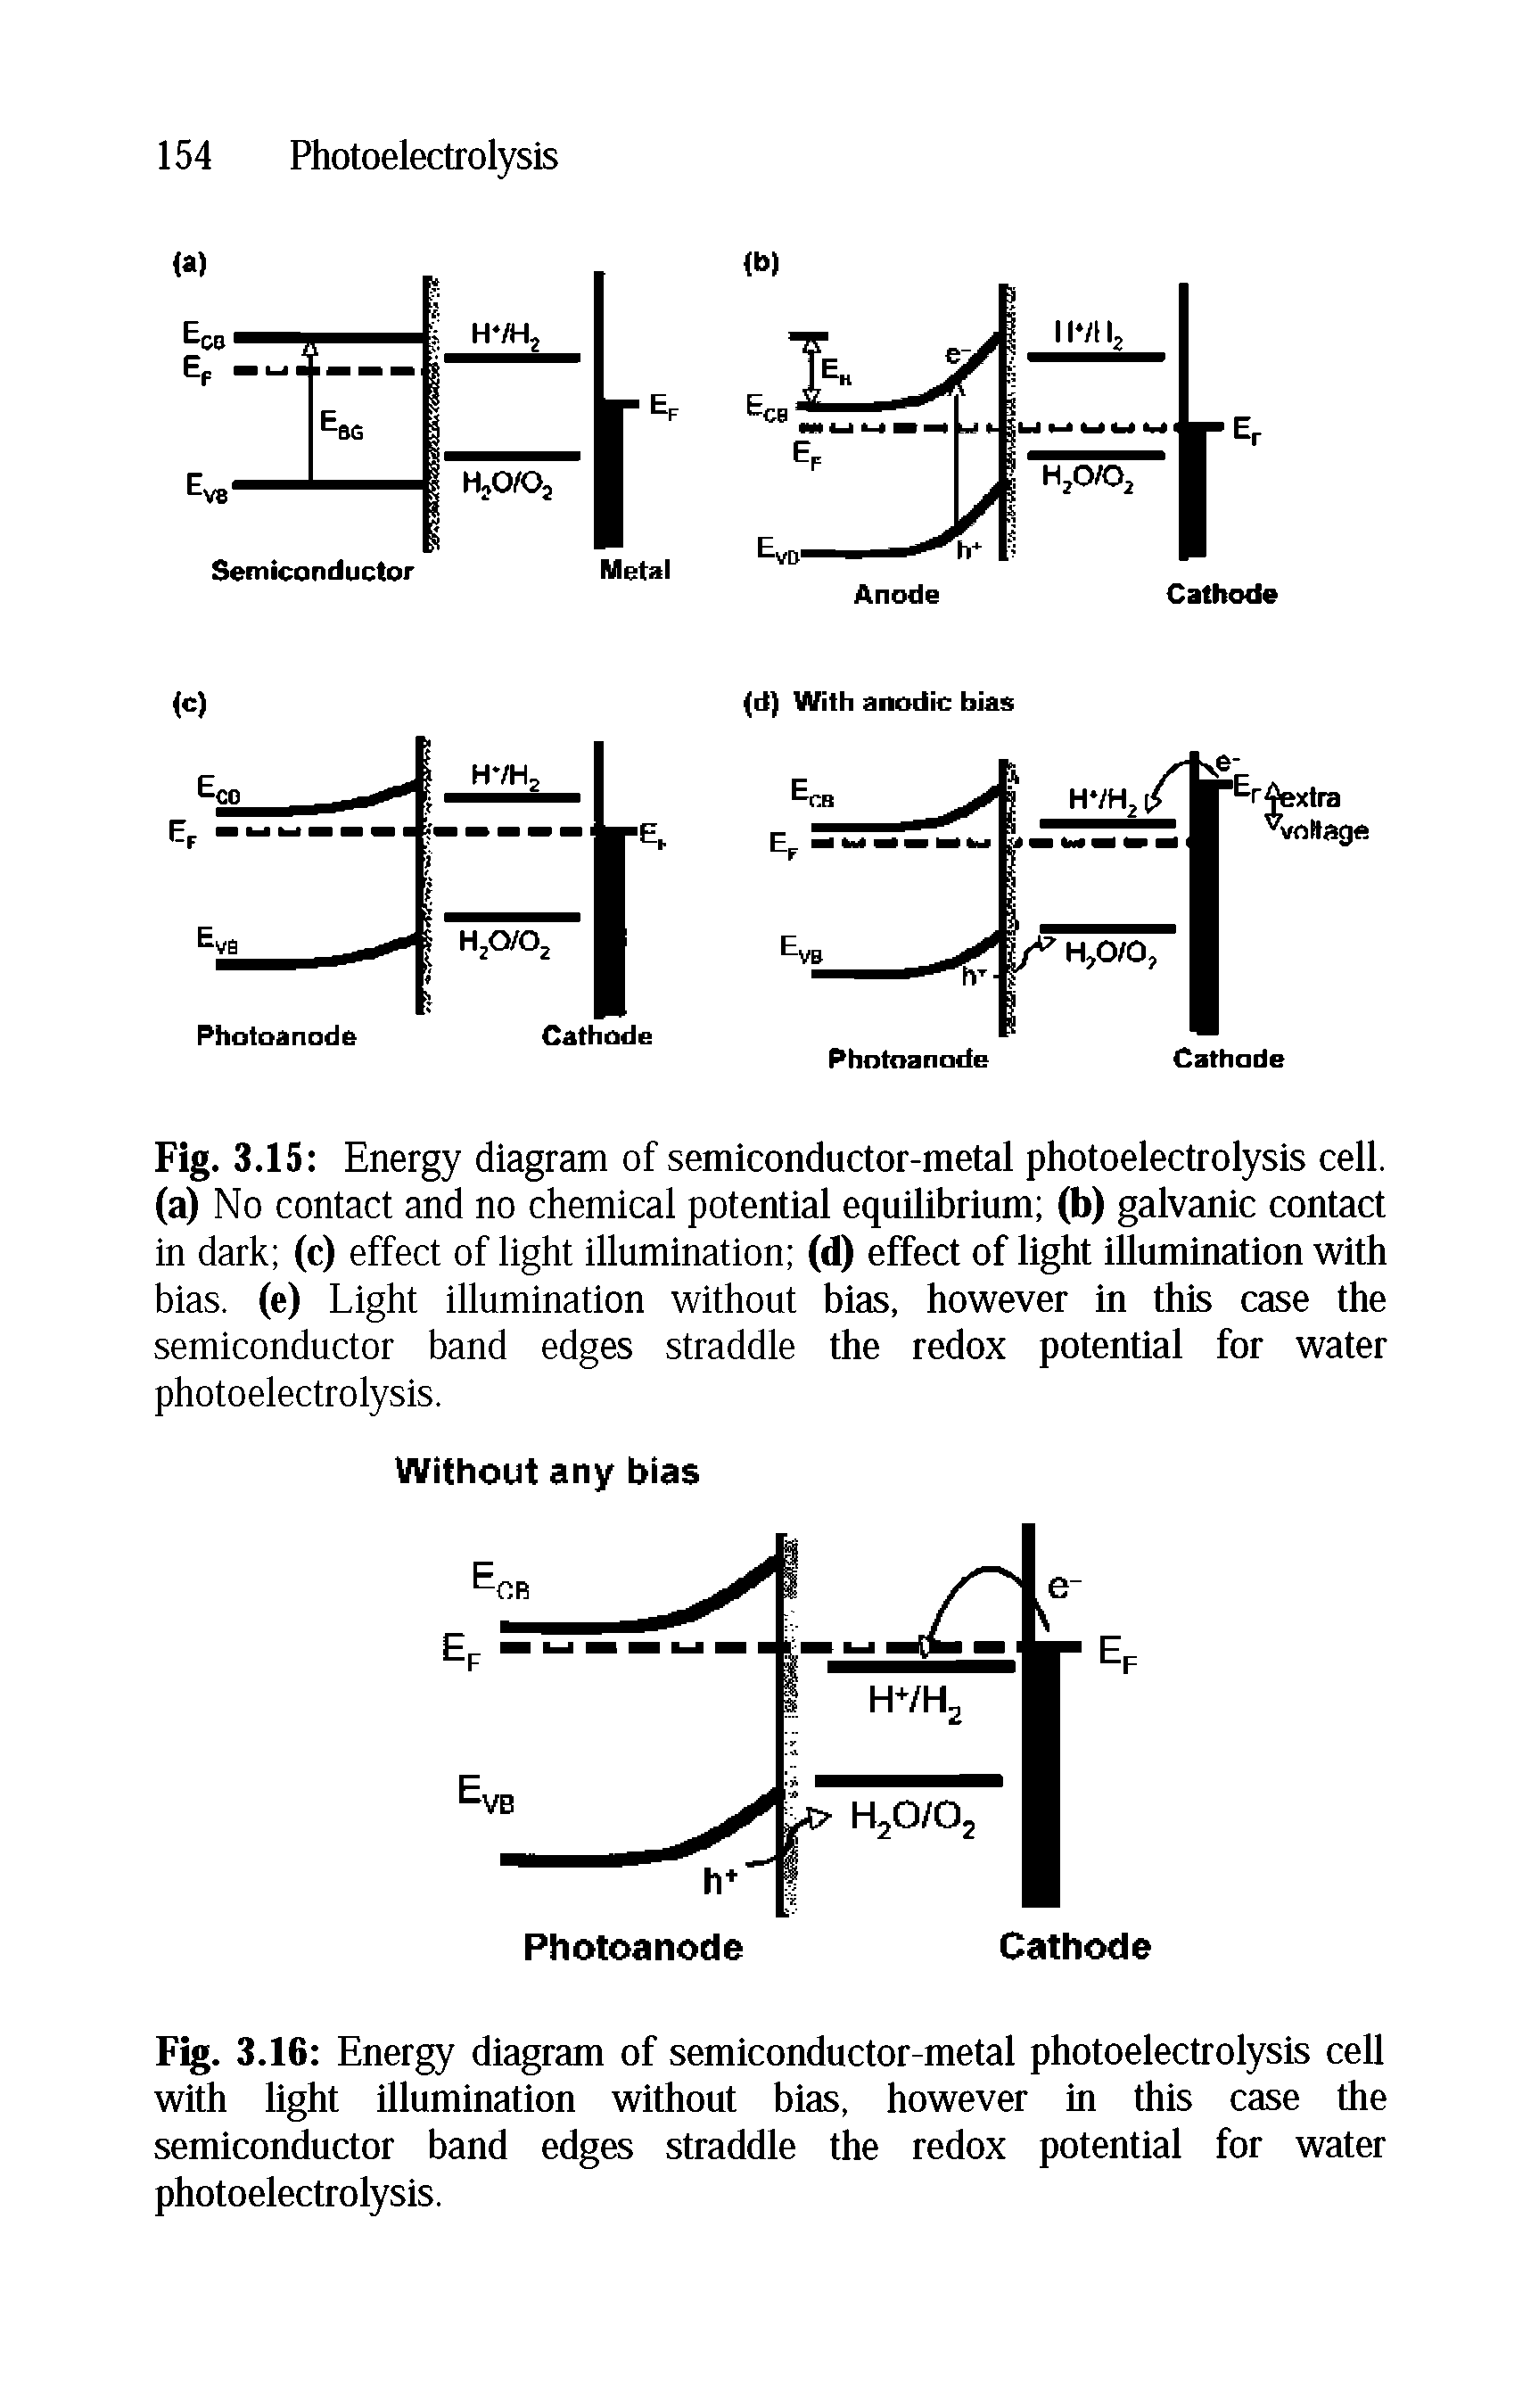 Fig. 3.16 Energy diagram of semiconductor-metal photoelectrolysis cell with light illumination without bias, however in this case the semiconductor band edges straddle the redox potential for water photoelectrolysis.